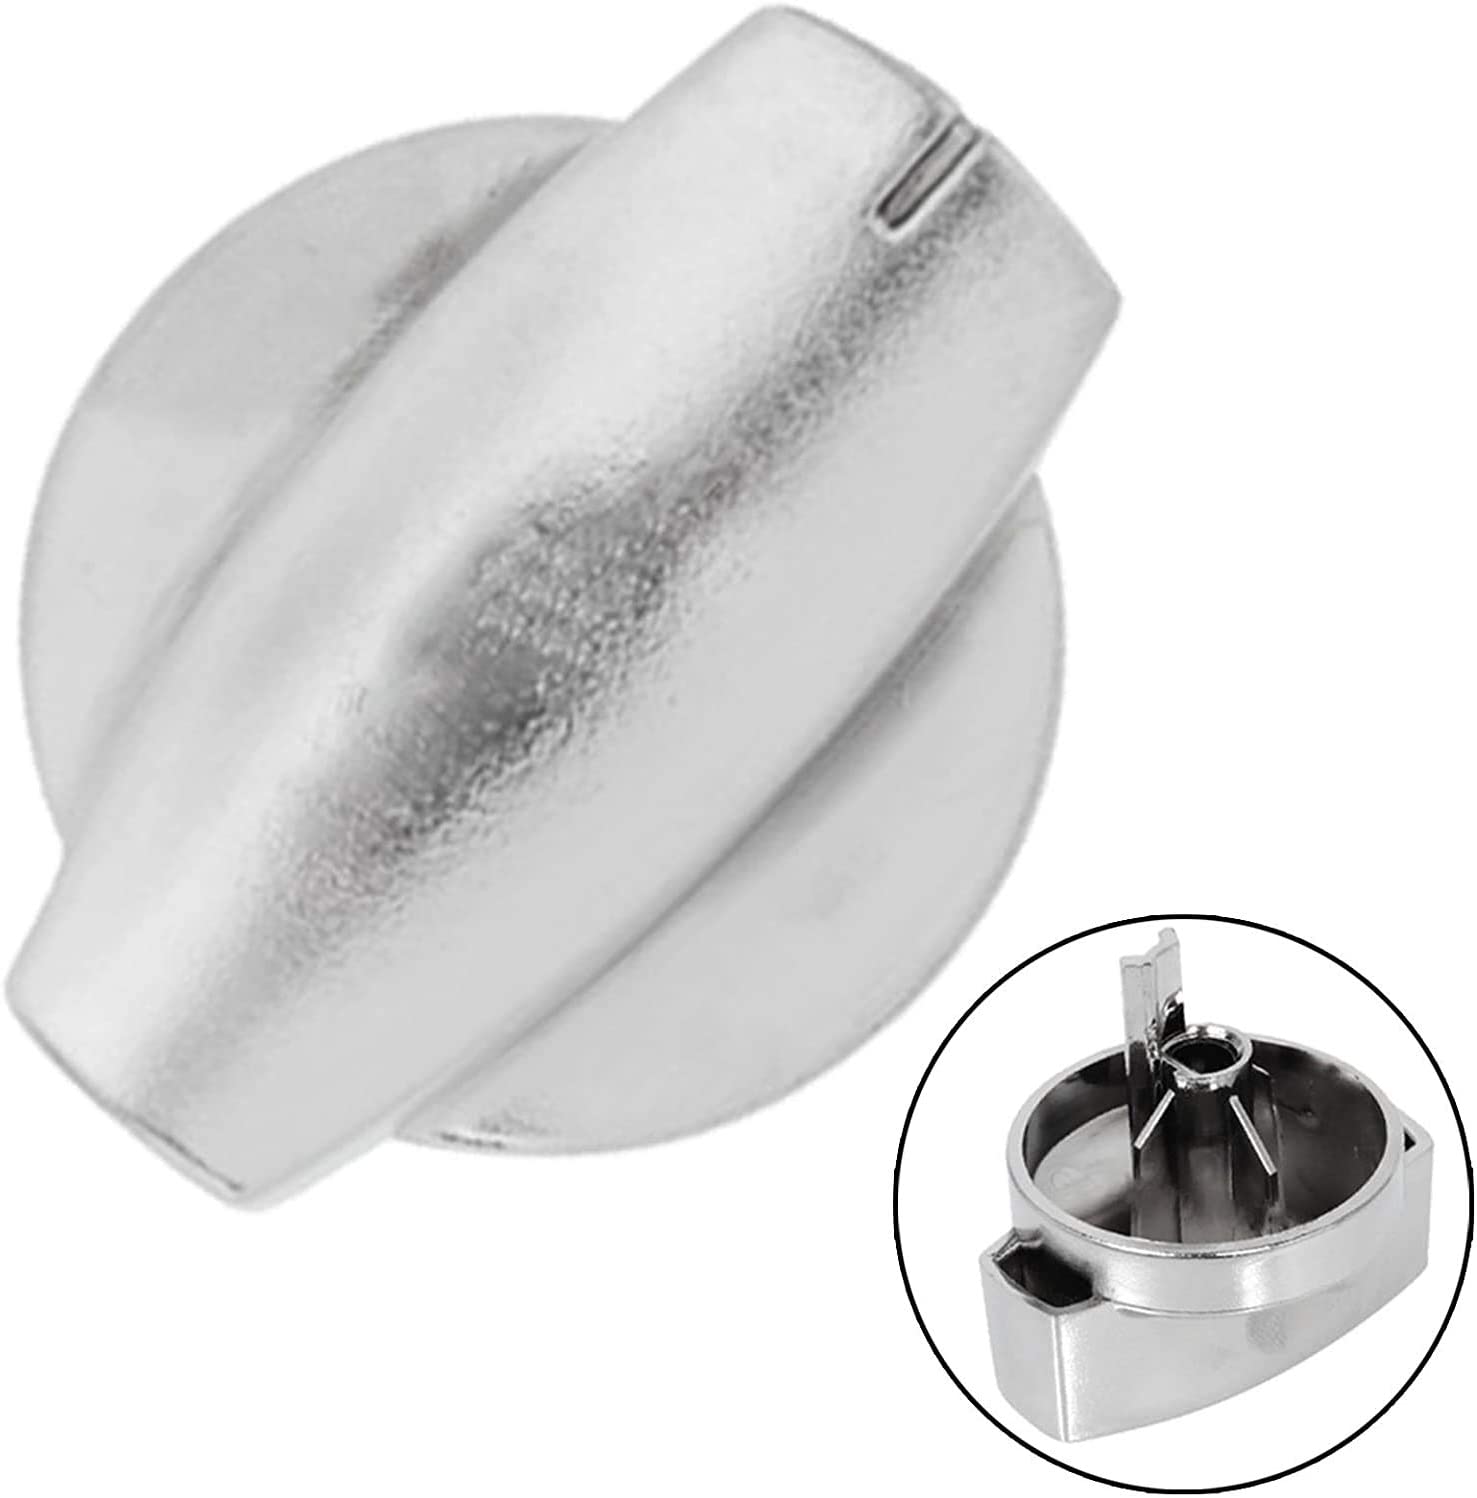 BELLING Hob Hotplate Knob Switch Chrome Silver Countryrange 444445 1000 (Pack of 5)